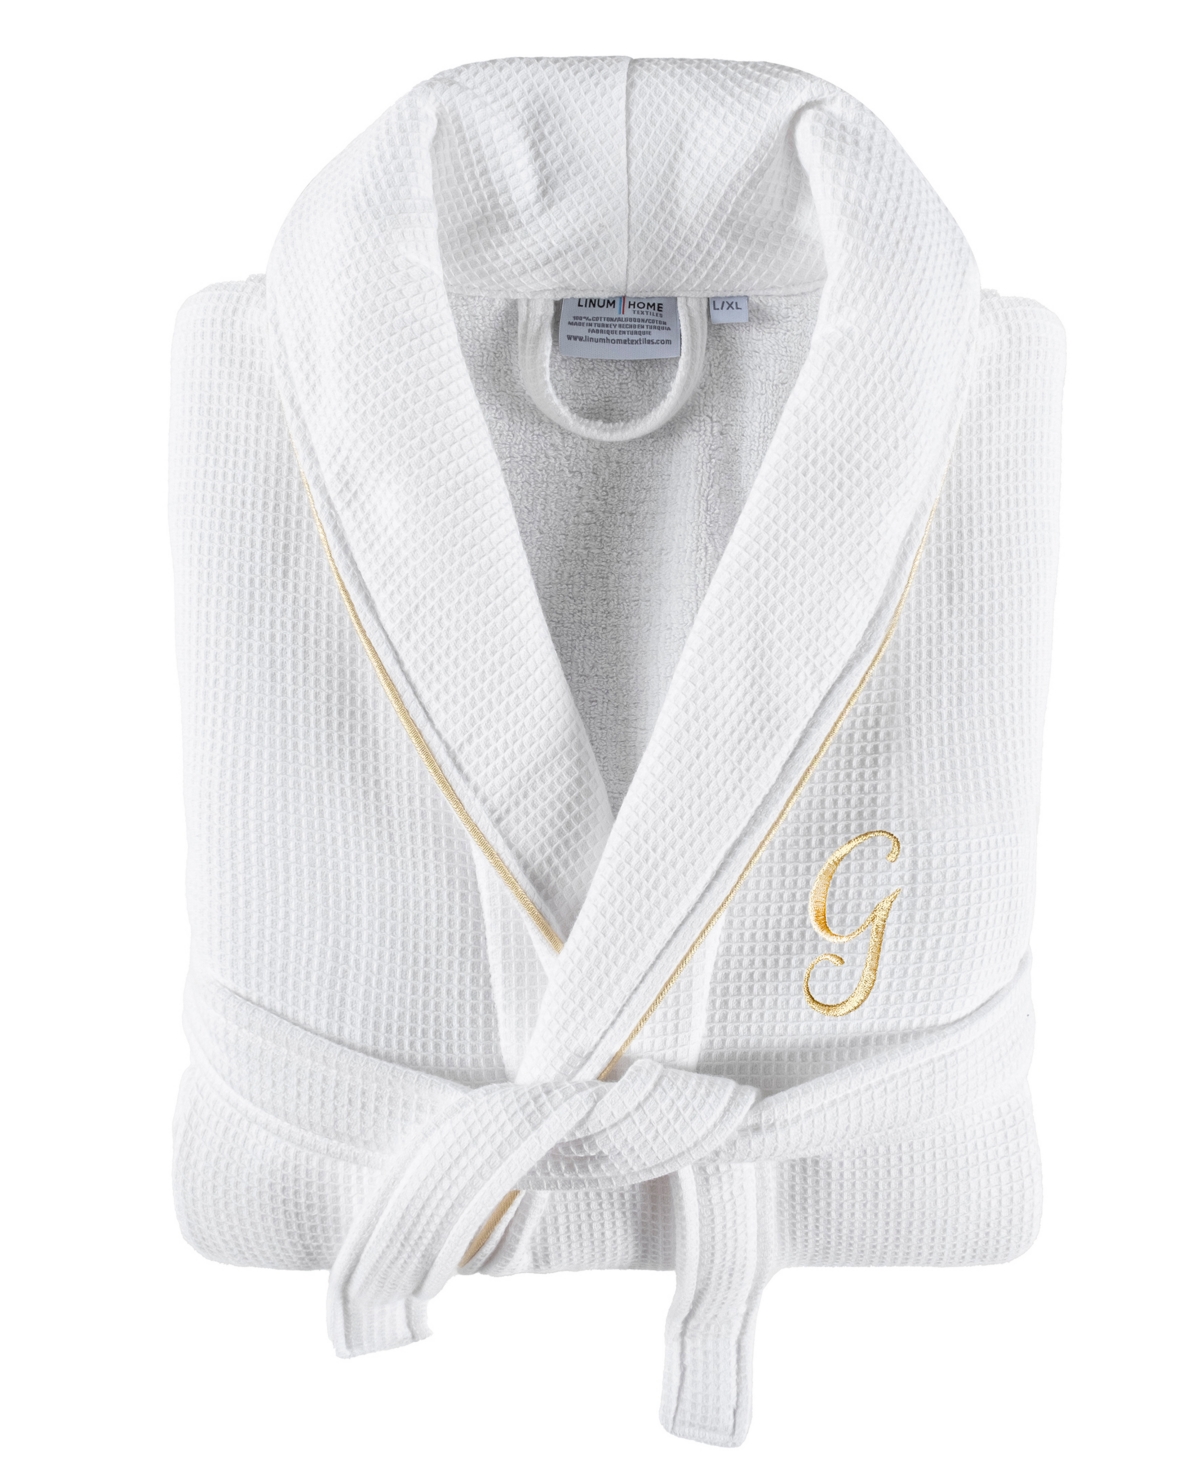 Linum Home Textiles 100% Turkish Cotton Unisex Personalized Waffle Weave Terry Bathrobe With Satin Piped Trim In White G